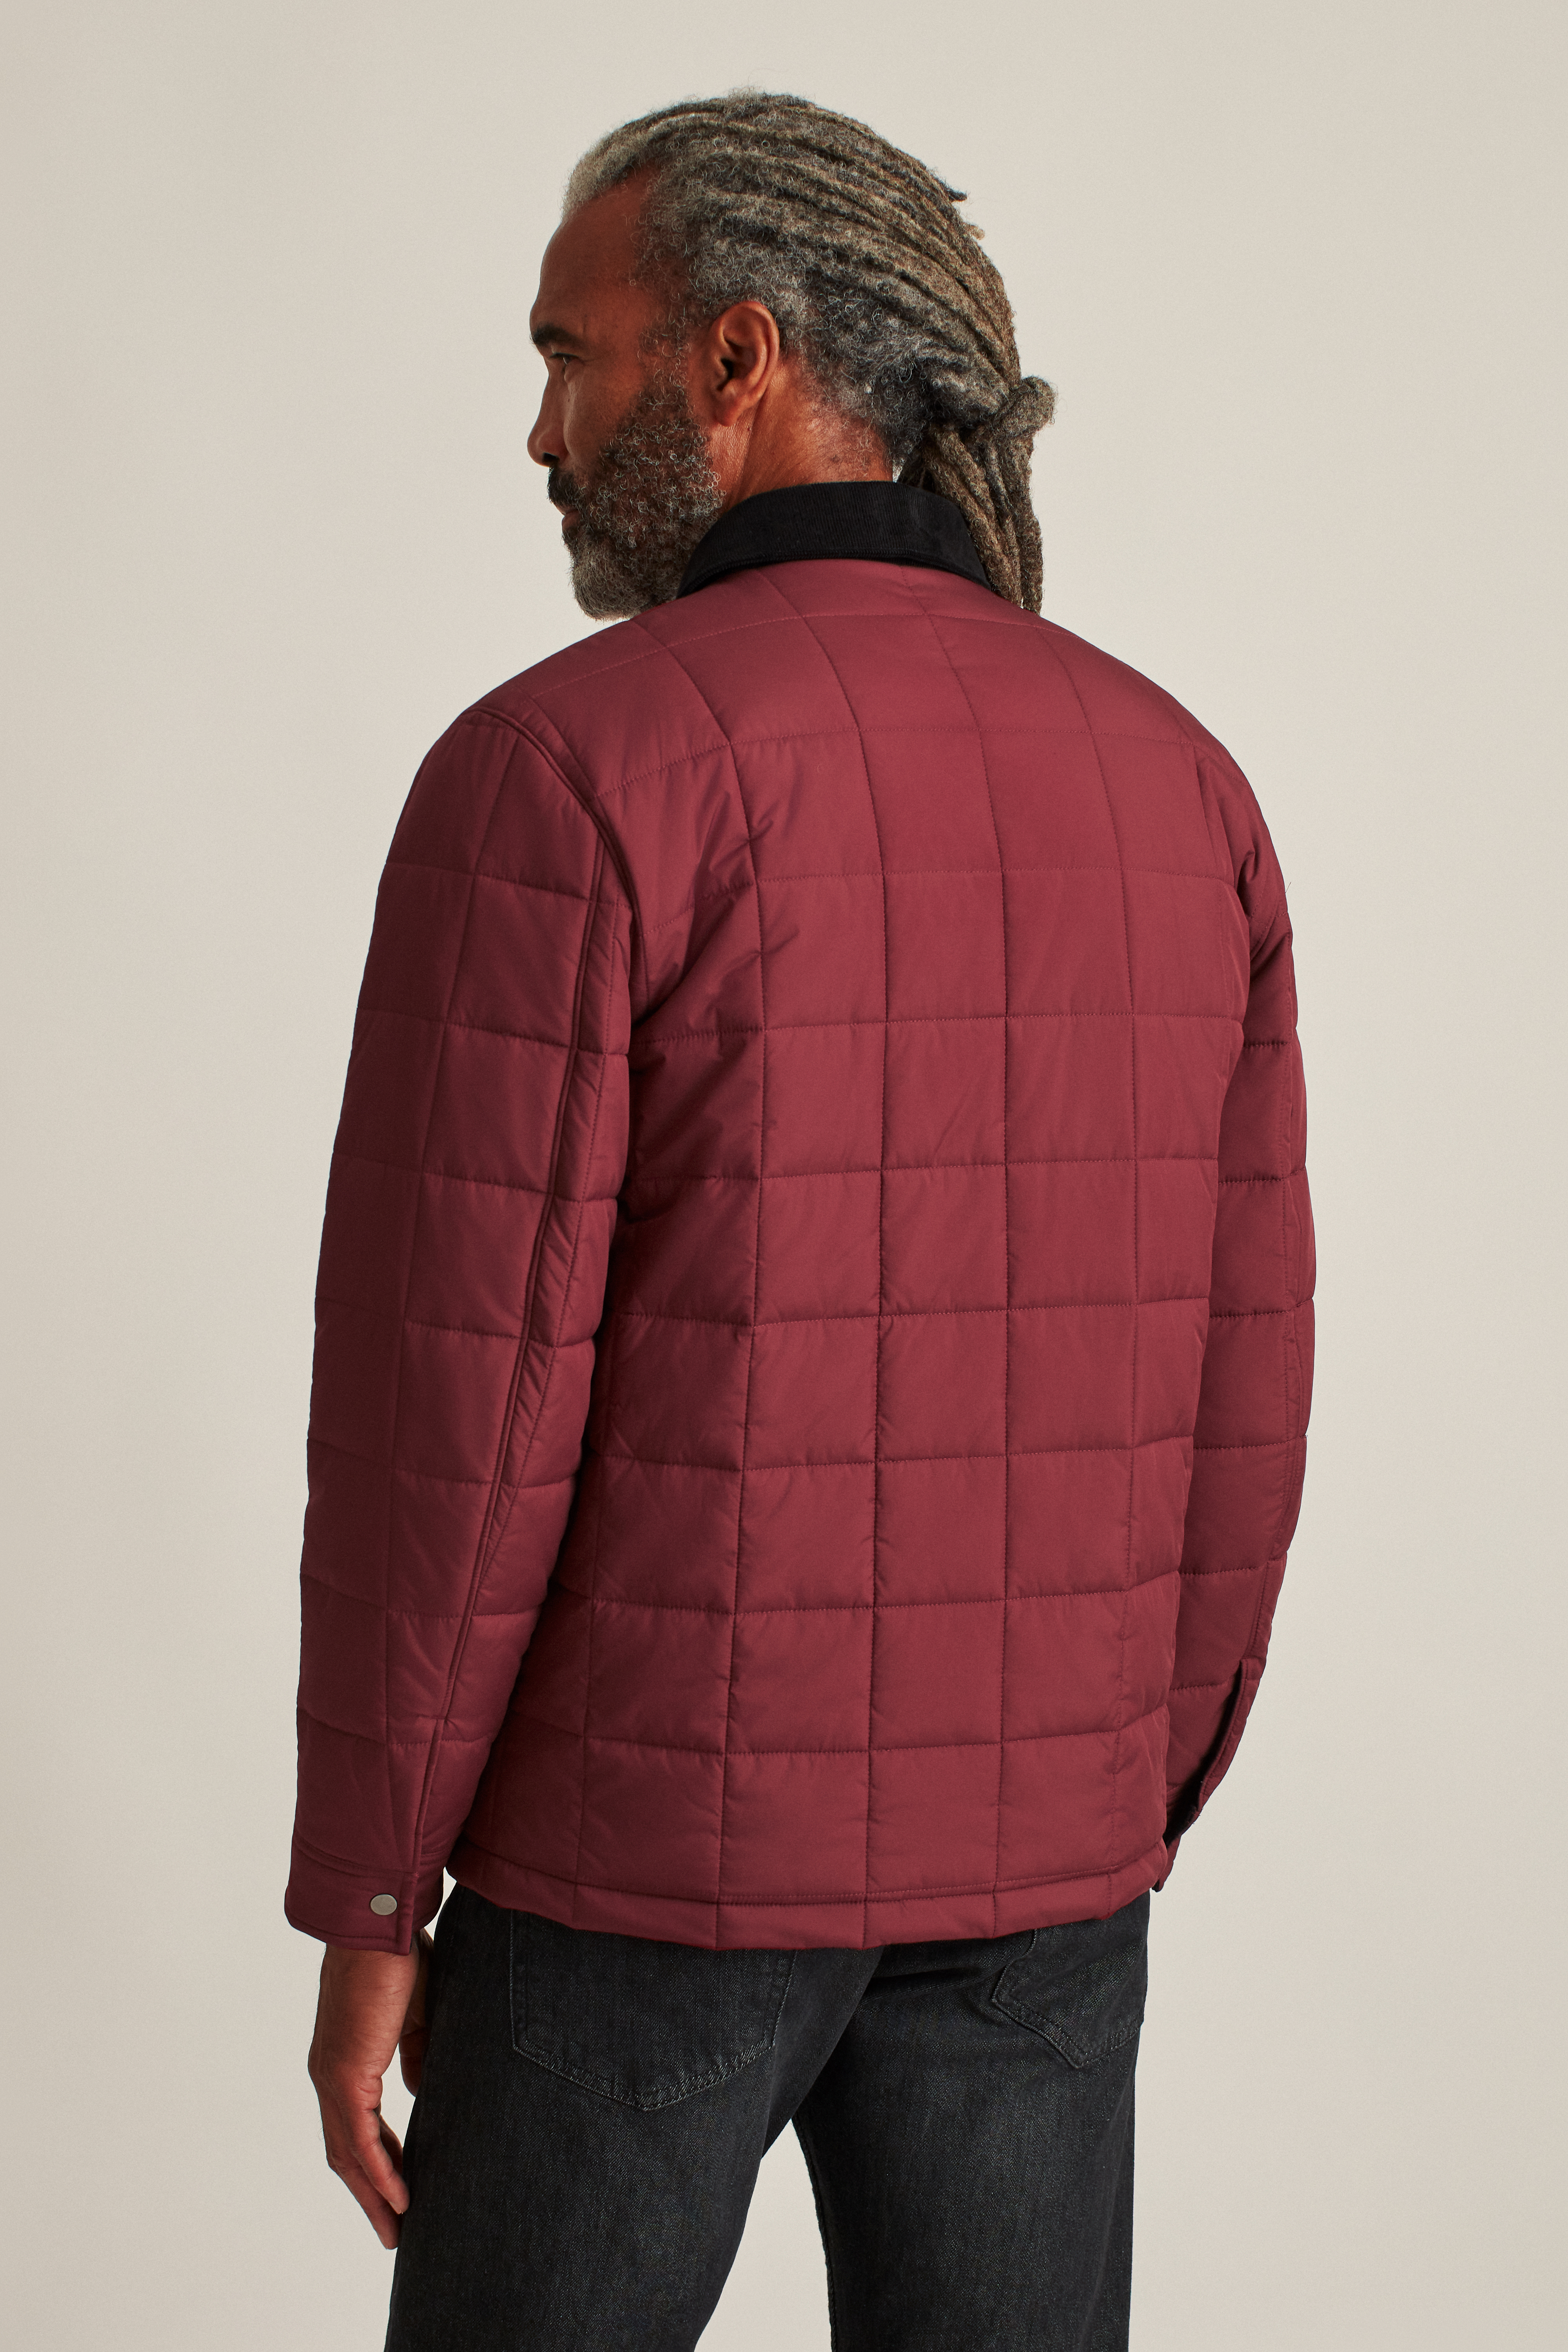 The Quilted Barn Jacket, Bonobos